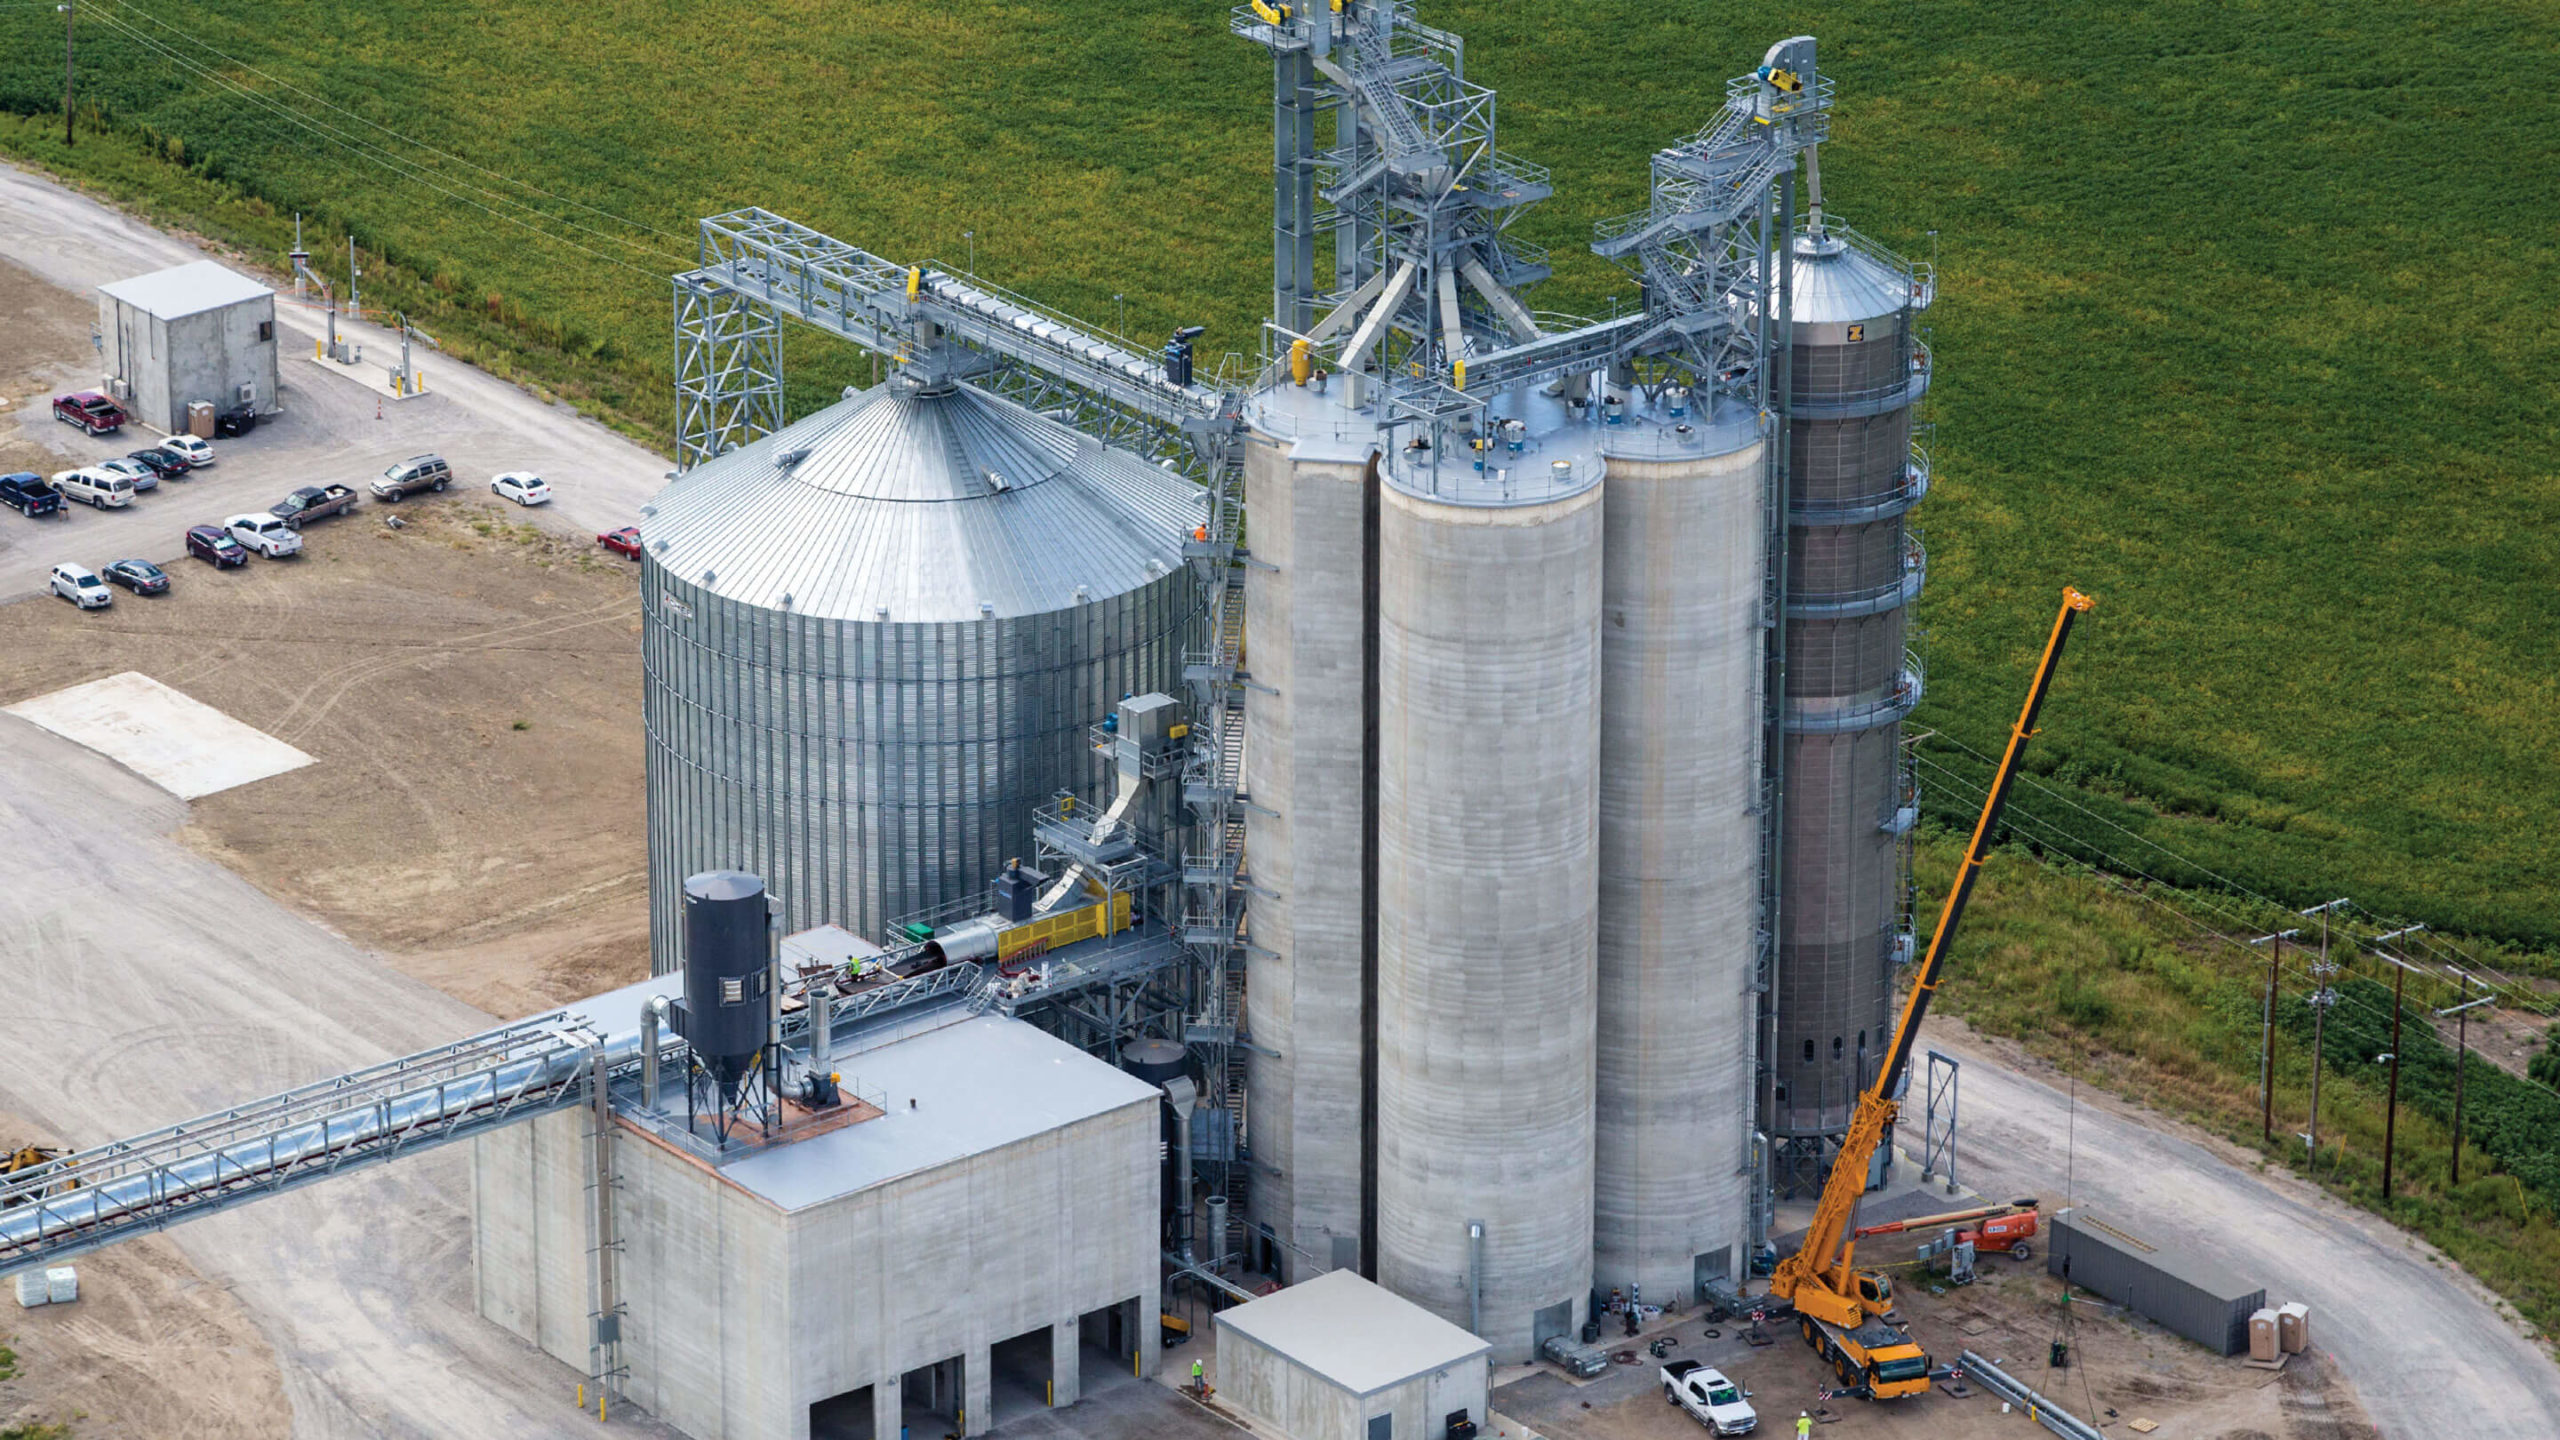 Aerial photo of a BRF baghouse dust collector installation